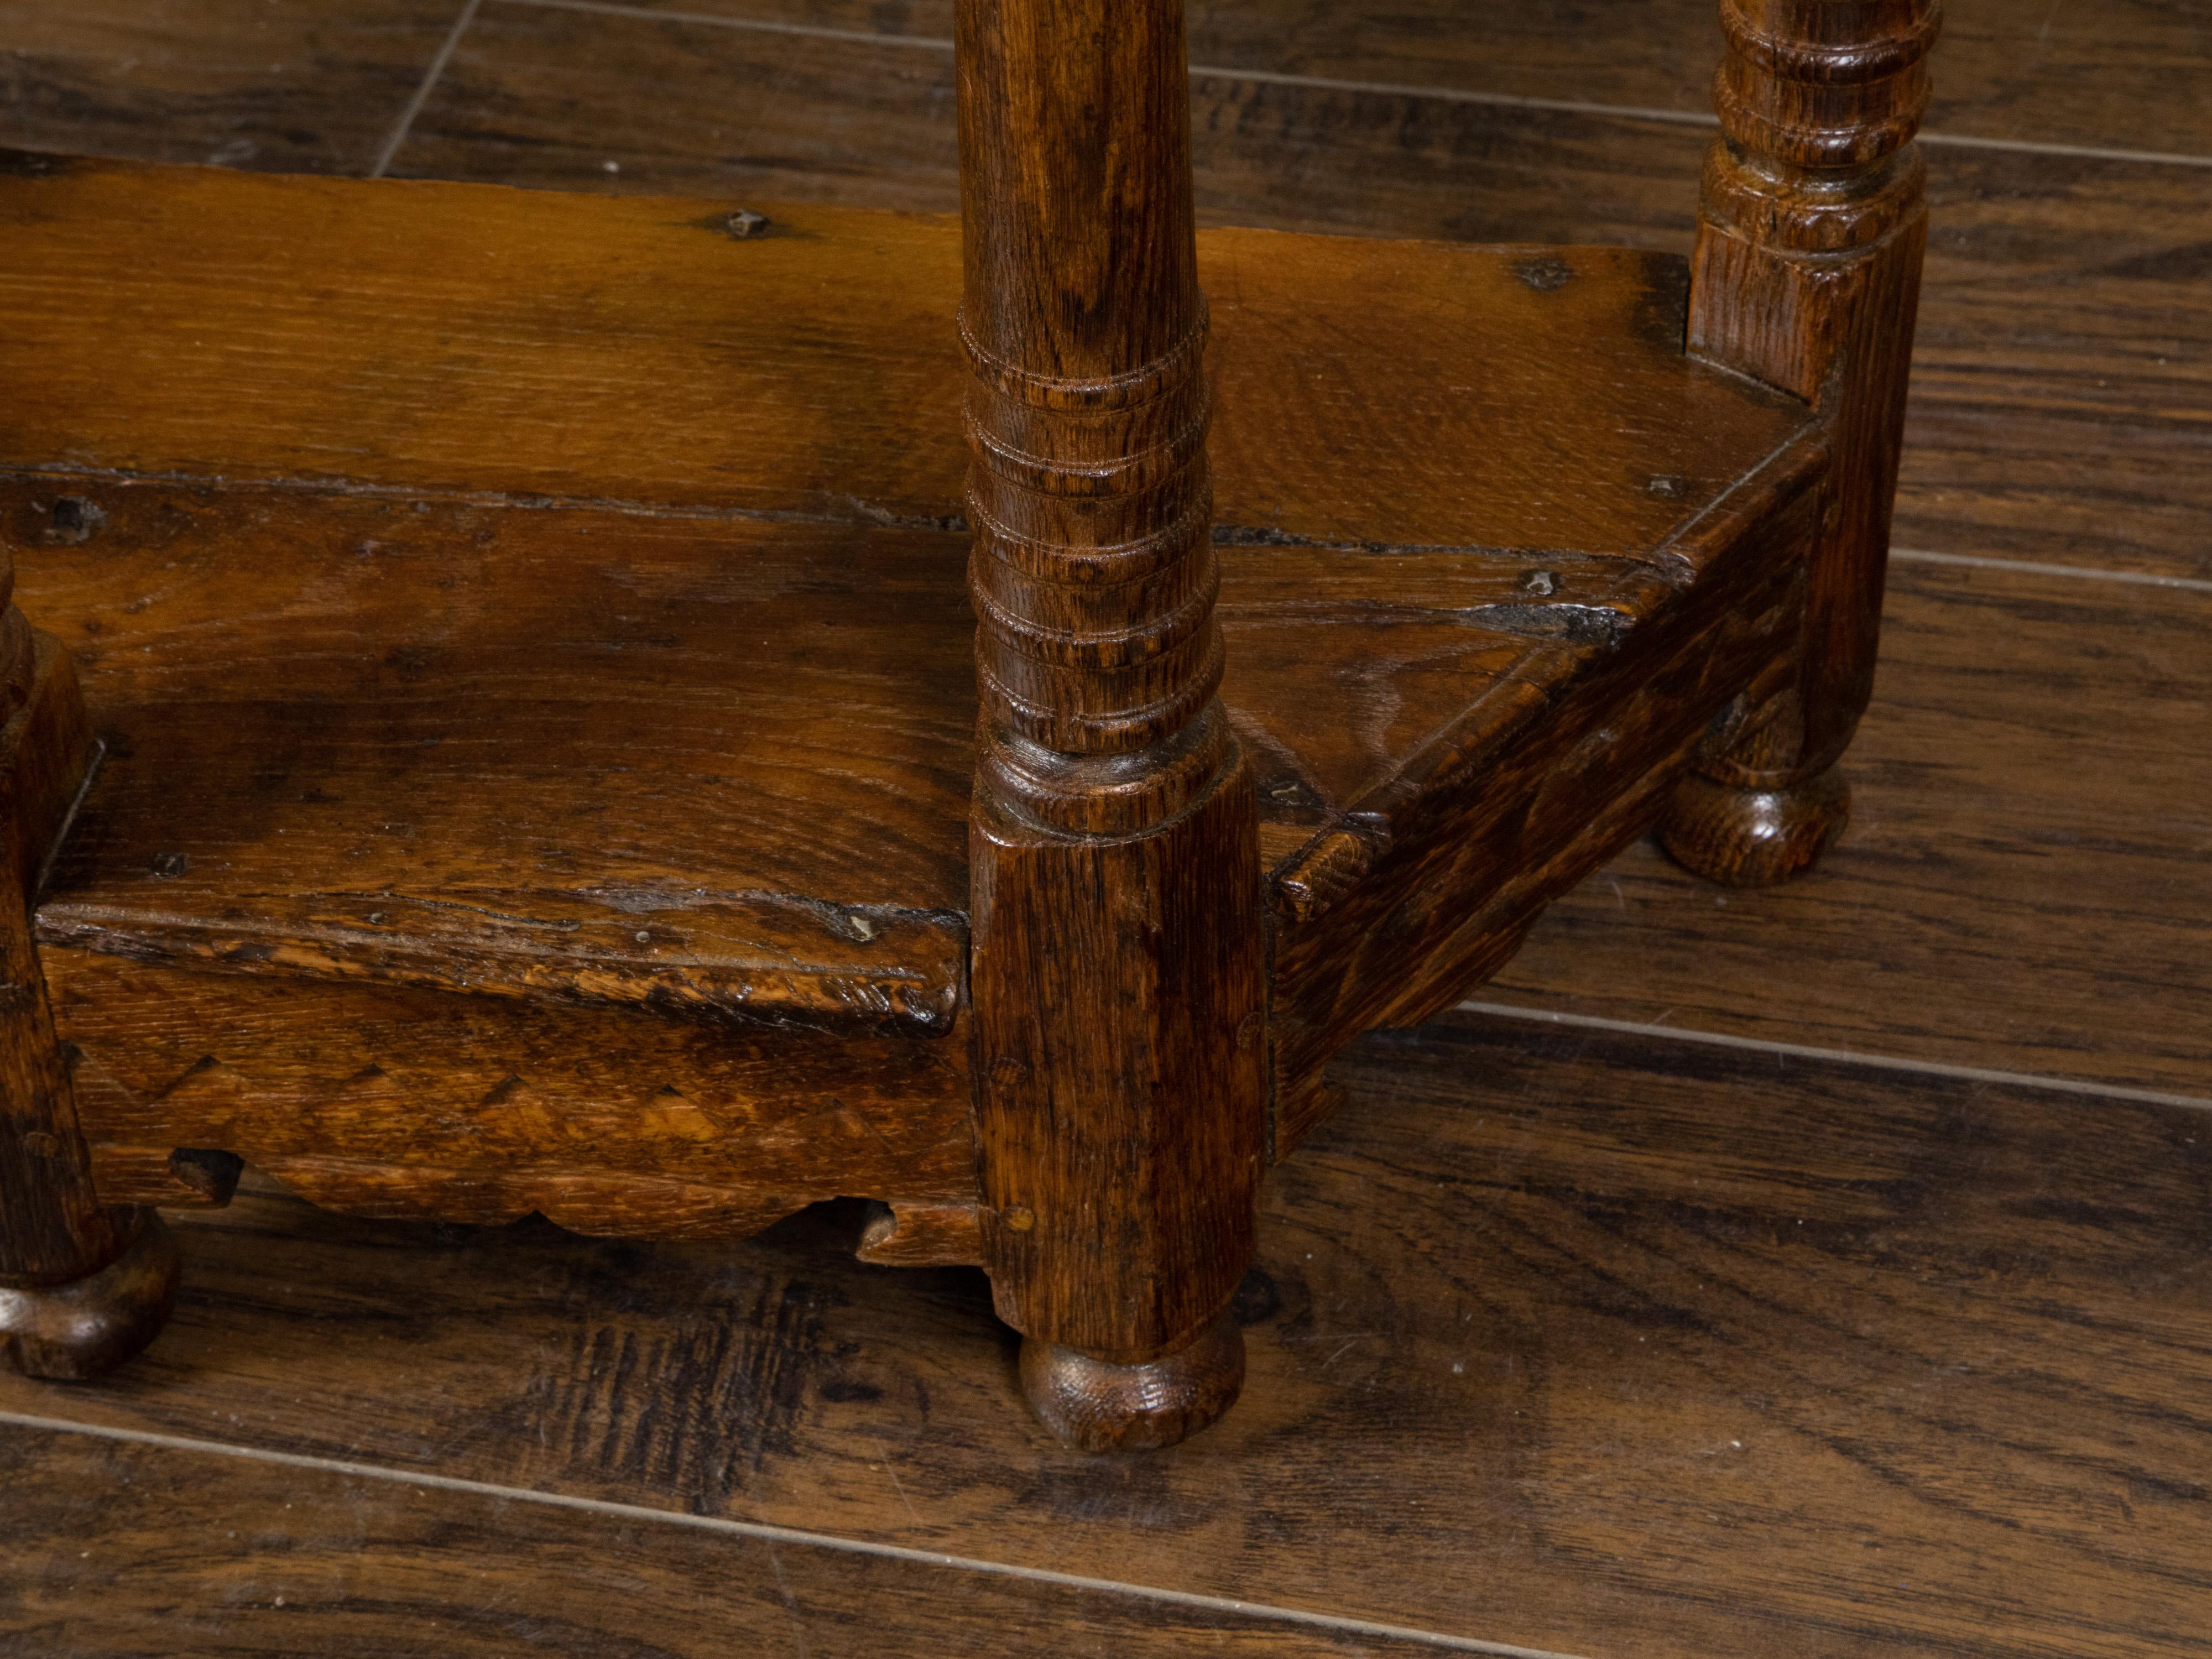 Pair of 19th Century English Carved Oak Demilune Tables with Column Legs For Sale 7